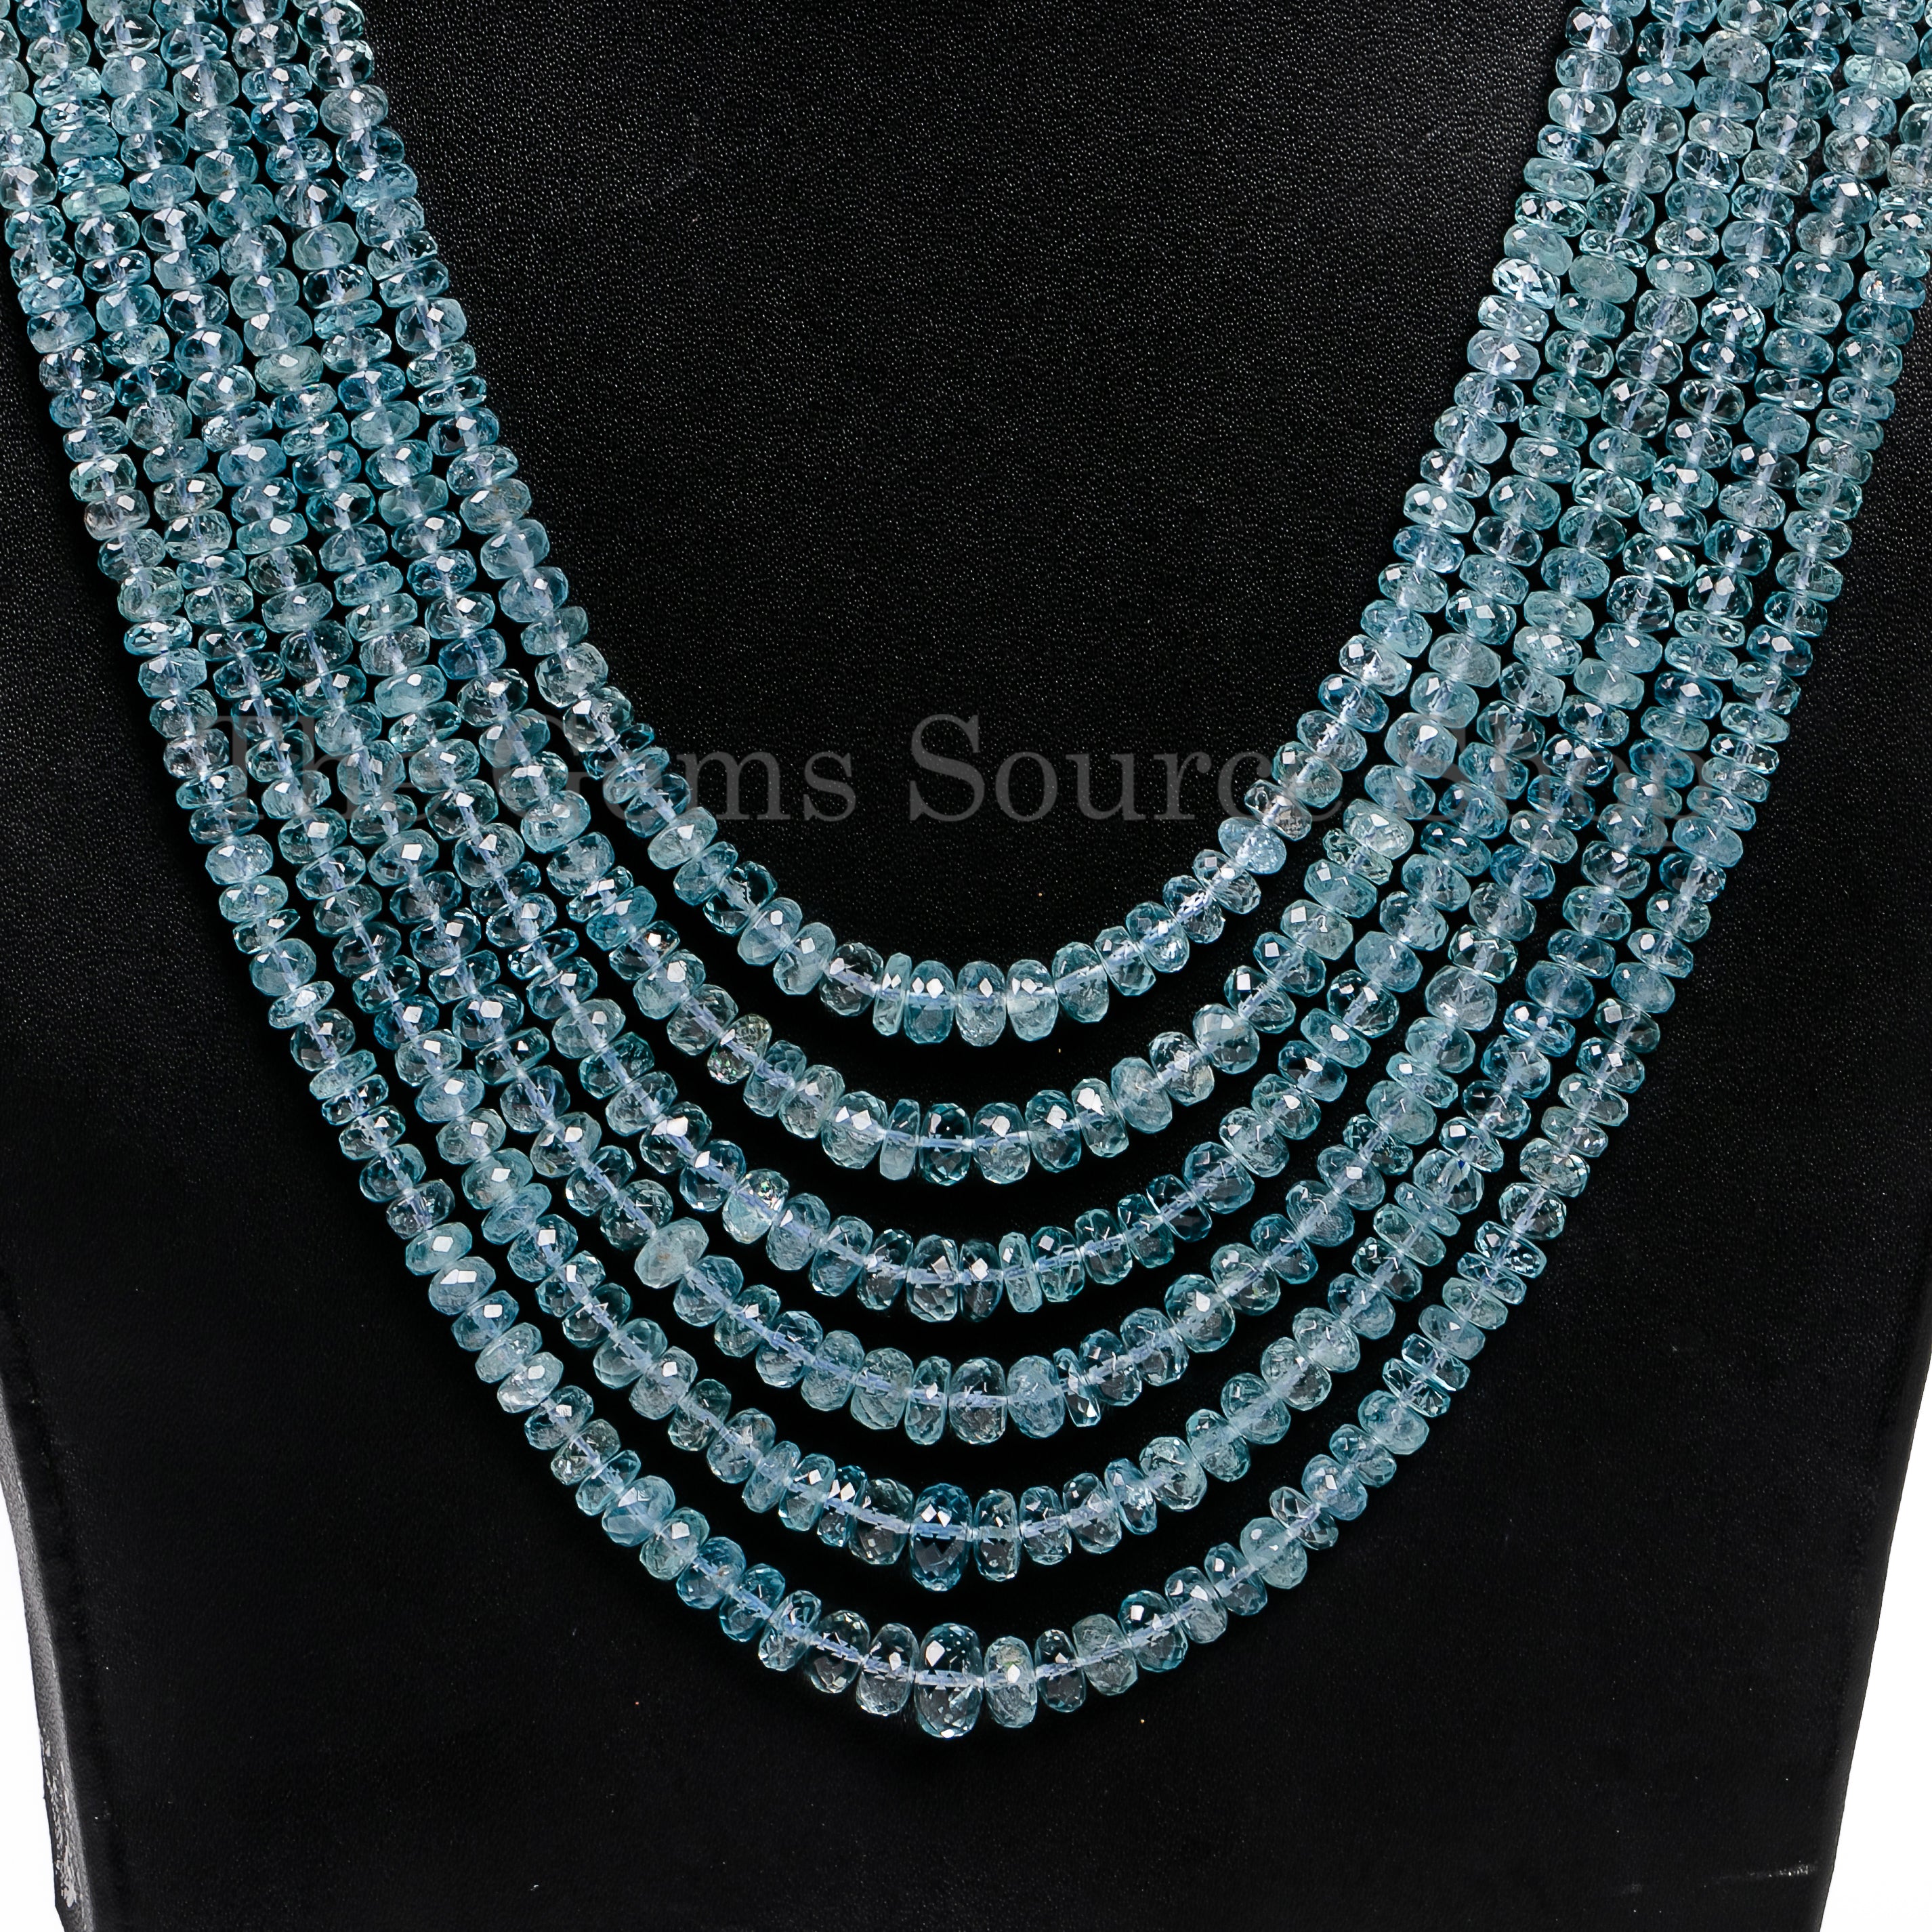 Aquamarine Faceted Rondelle Necklace (6 layered) TGS-4946